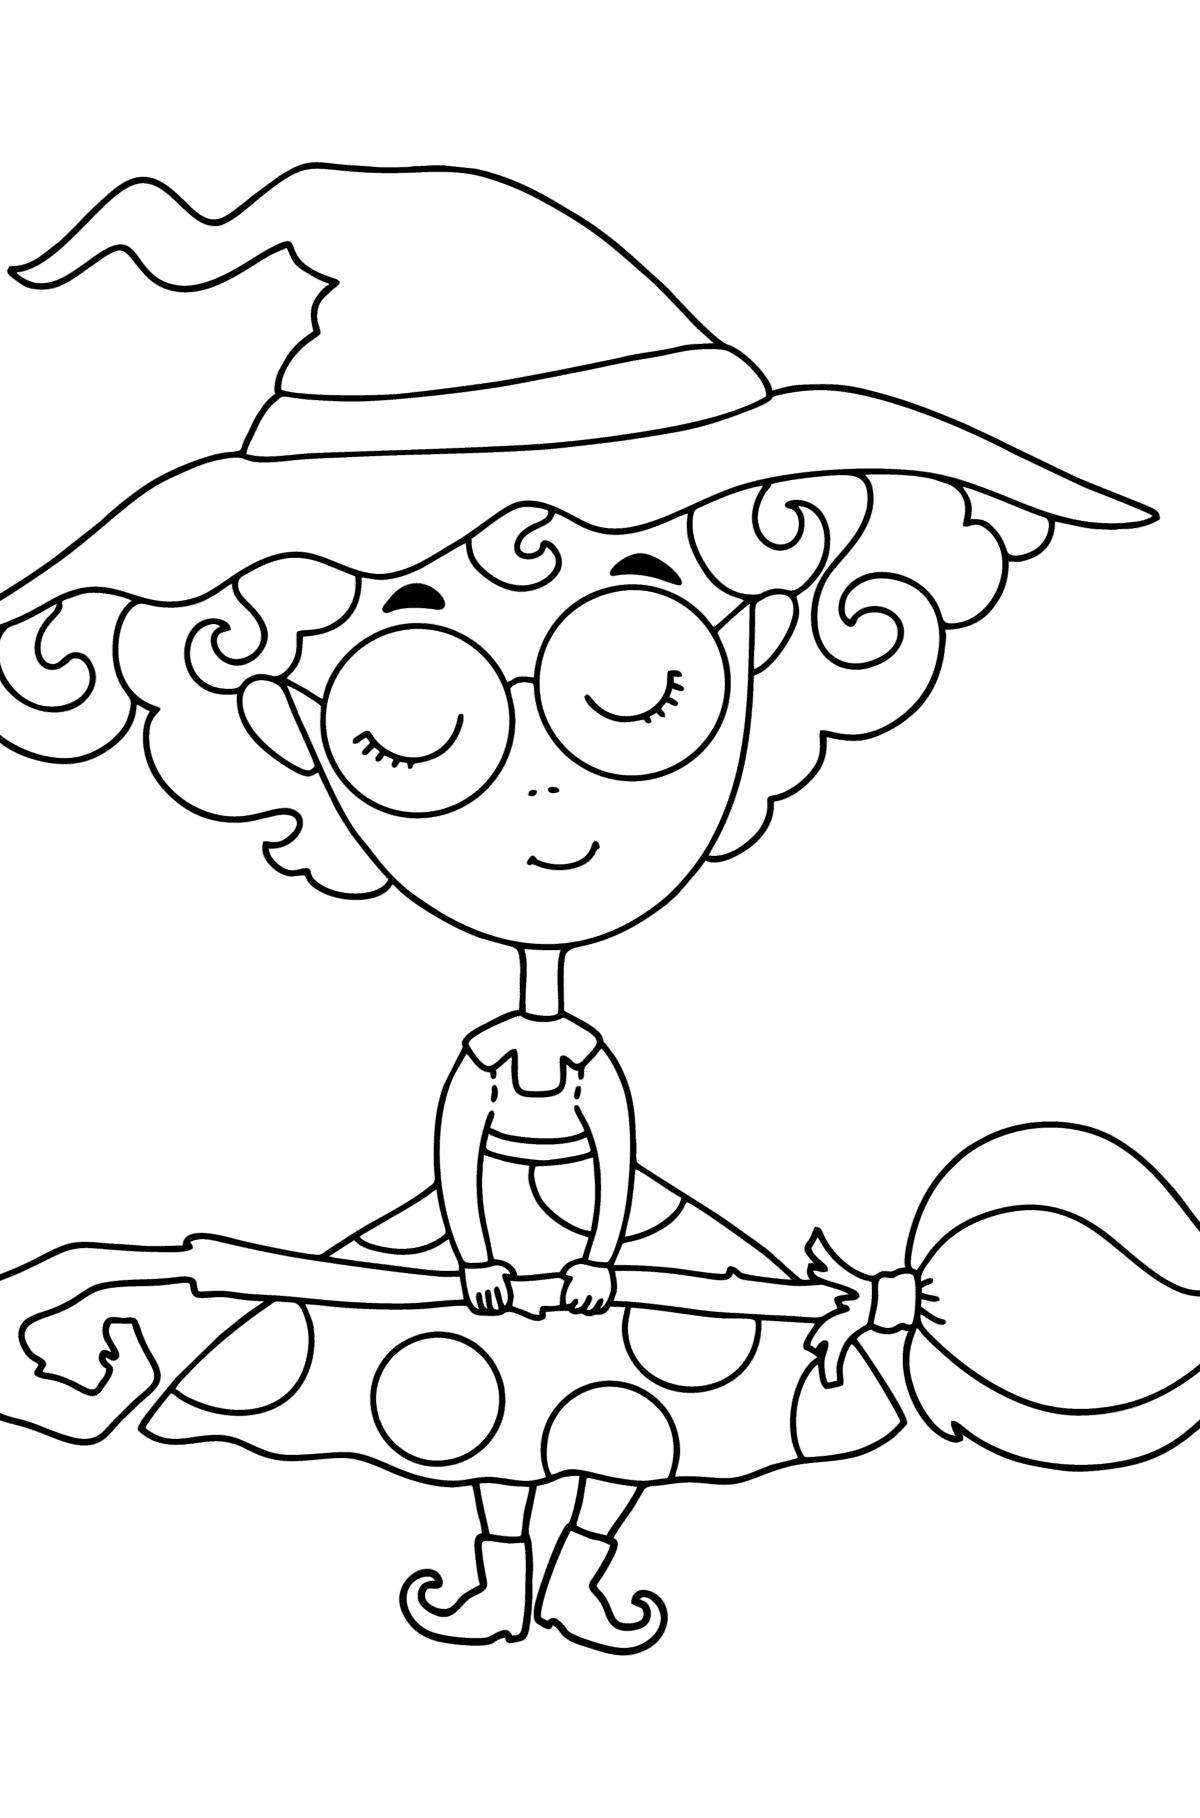 Witch with a broom сoloring page - Coloring Pages for Kids